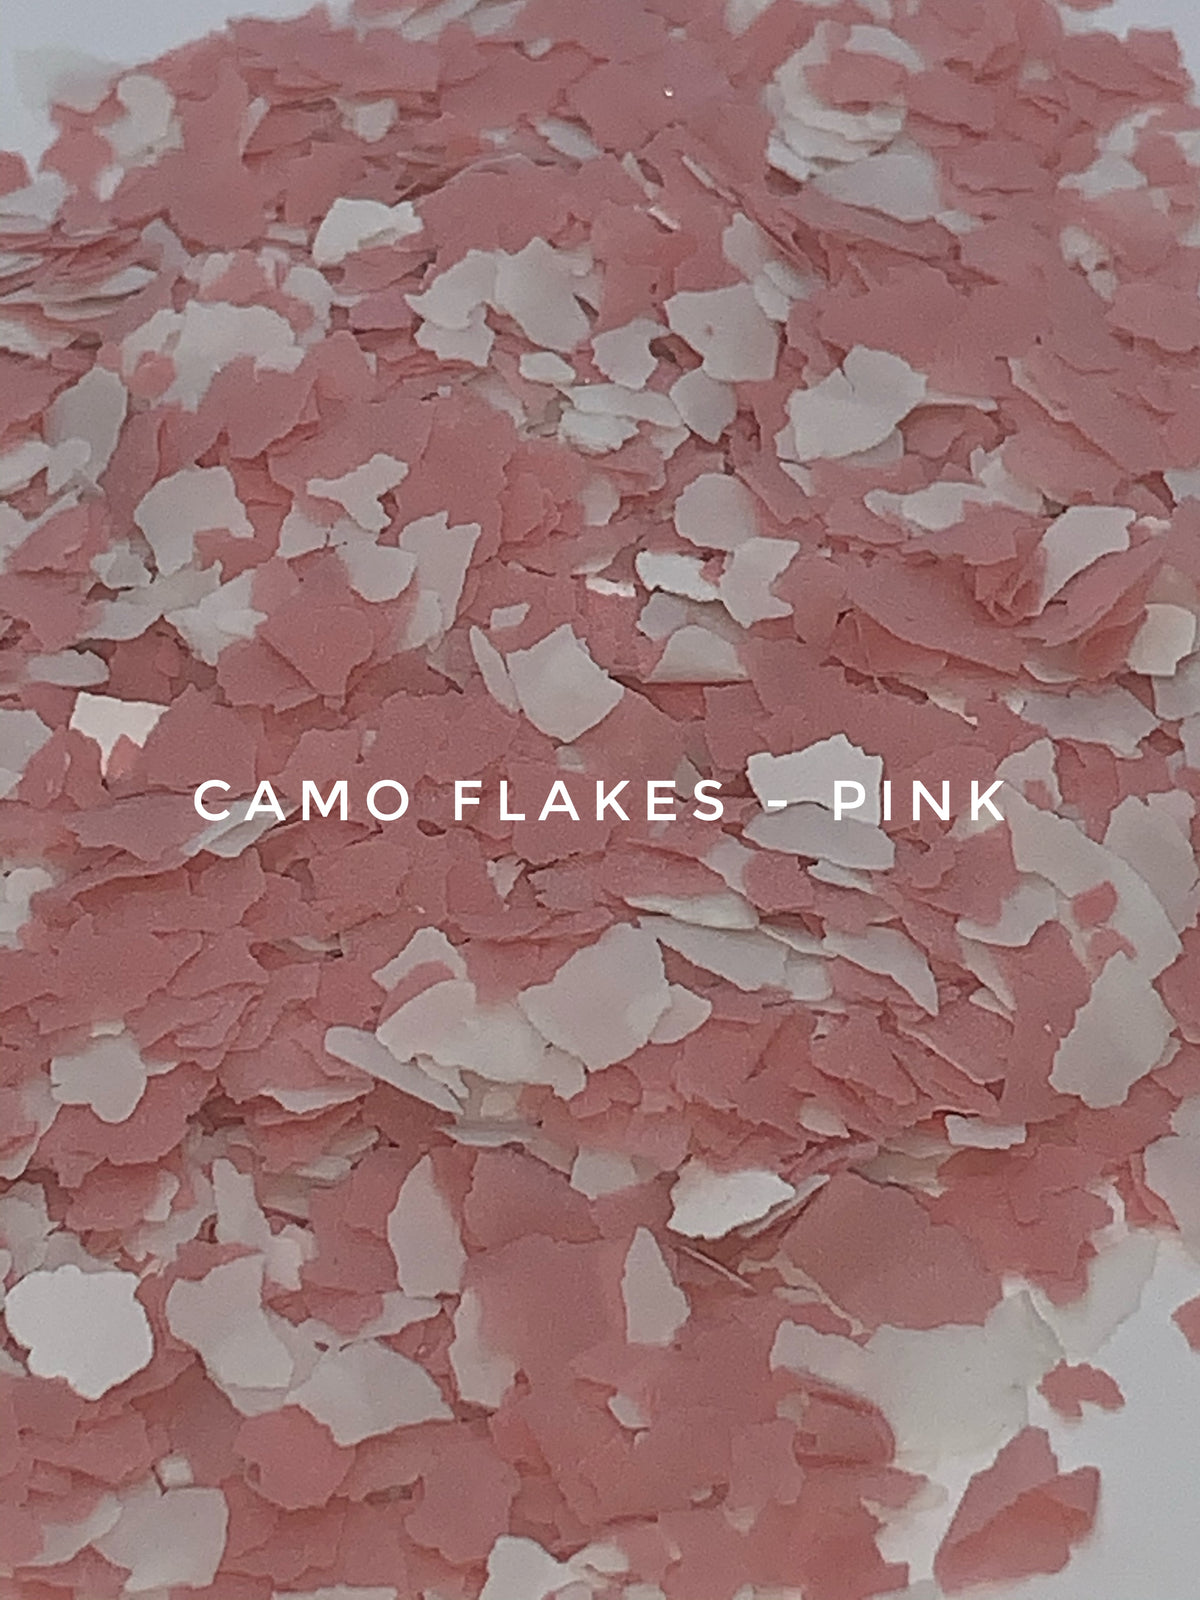 Camo Flakes - Pink